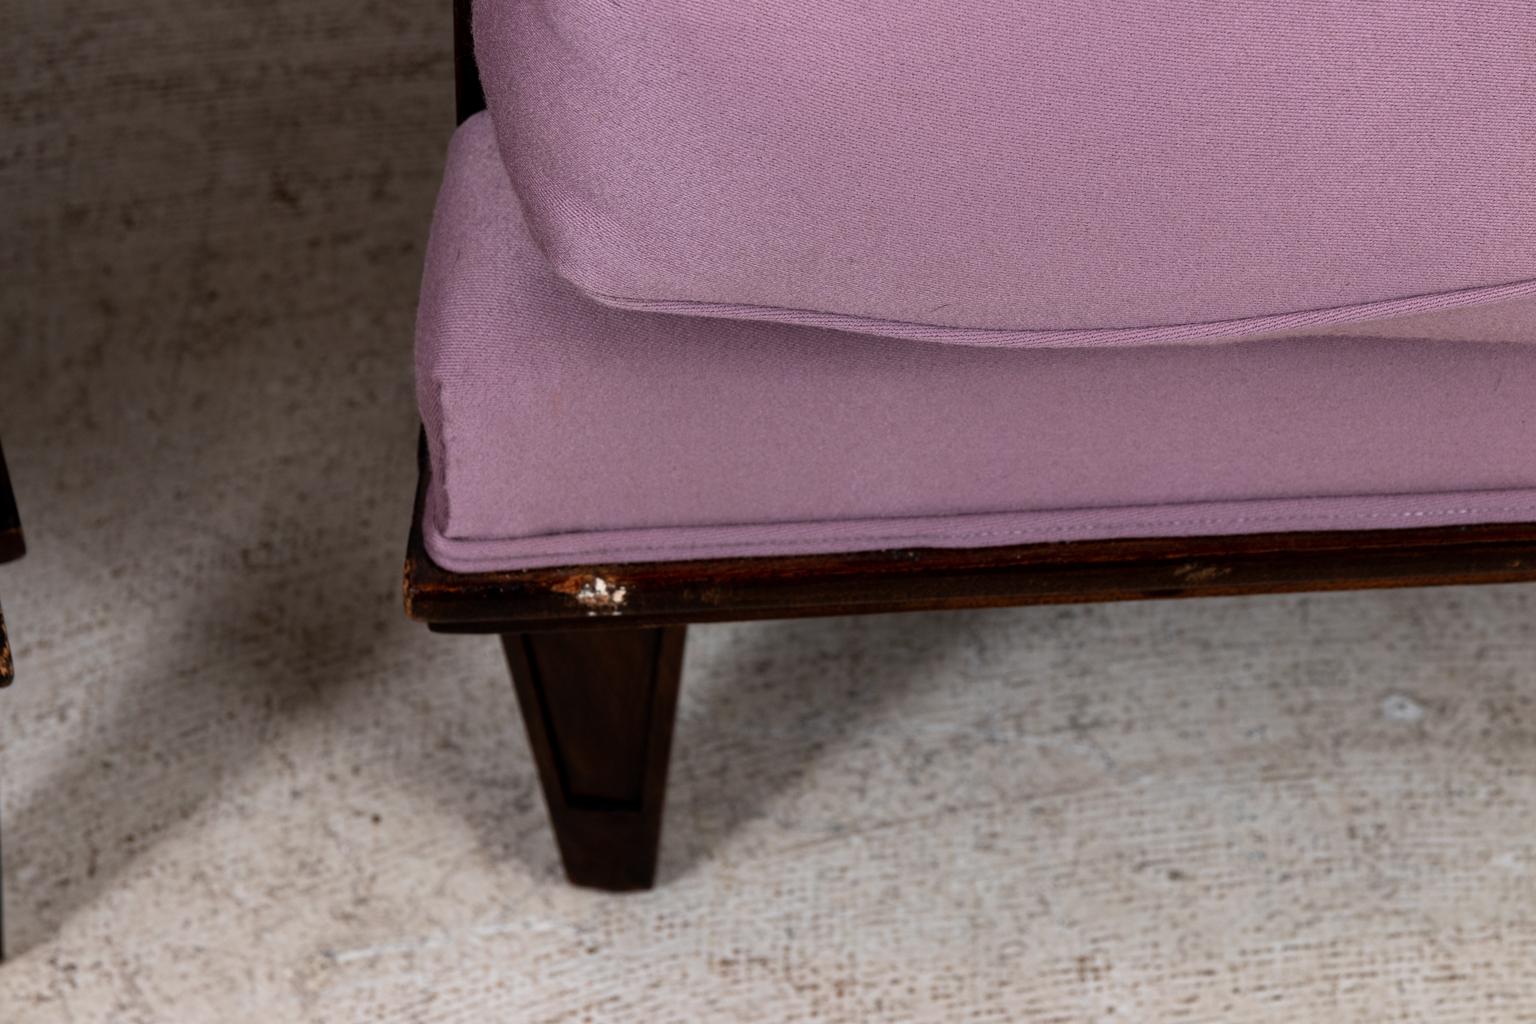 Circa 1940s pair of armchairs by Jules Leleu in the Art Deco style with polished Walnut frames, square shaped backs, and lilac satin upholstery. The upholstery also features tonal grosgrain trim. Made in France. Please note of wear consistent with